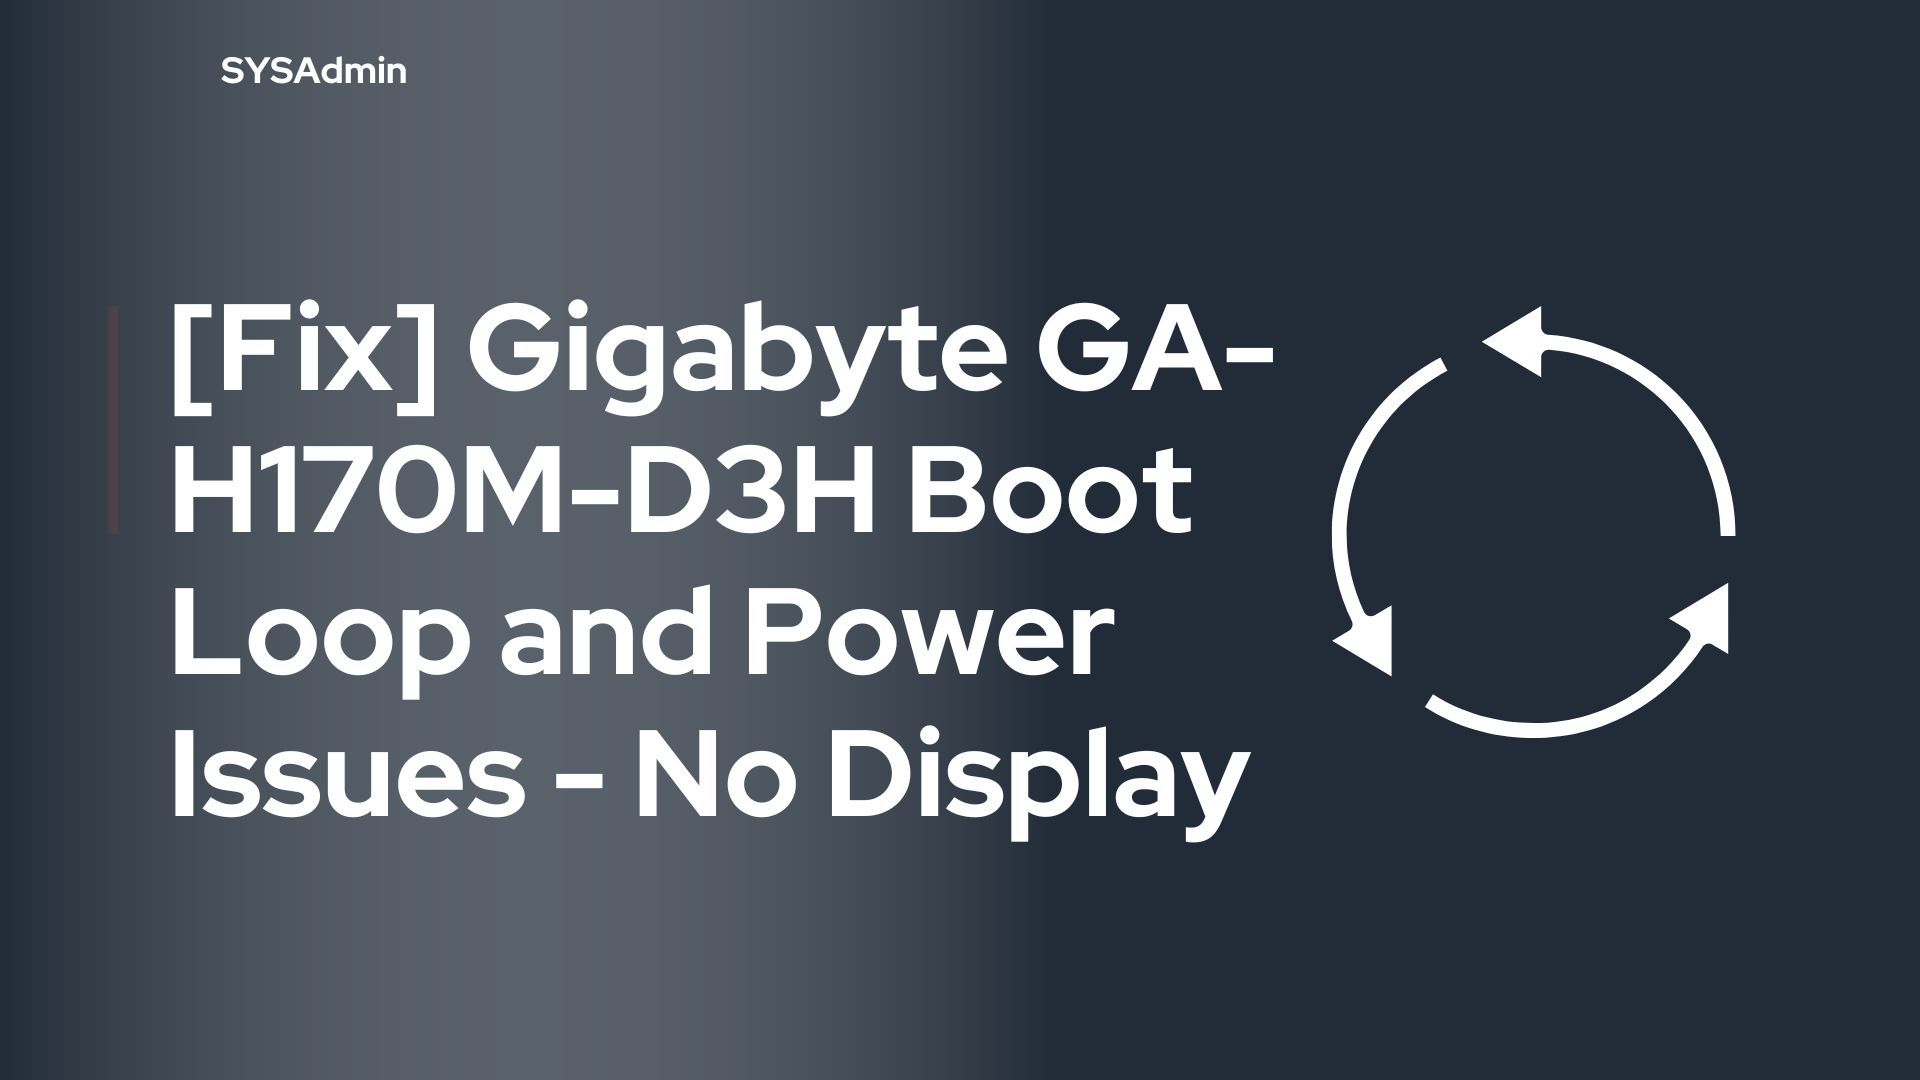 Gigabyte GA-H170M-D3H Boot Loop and Power Issues - No Display